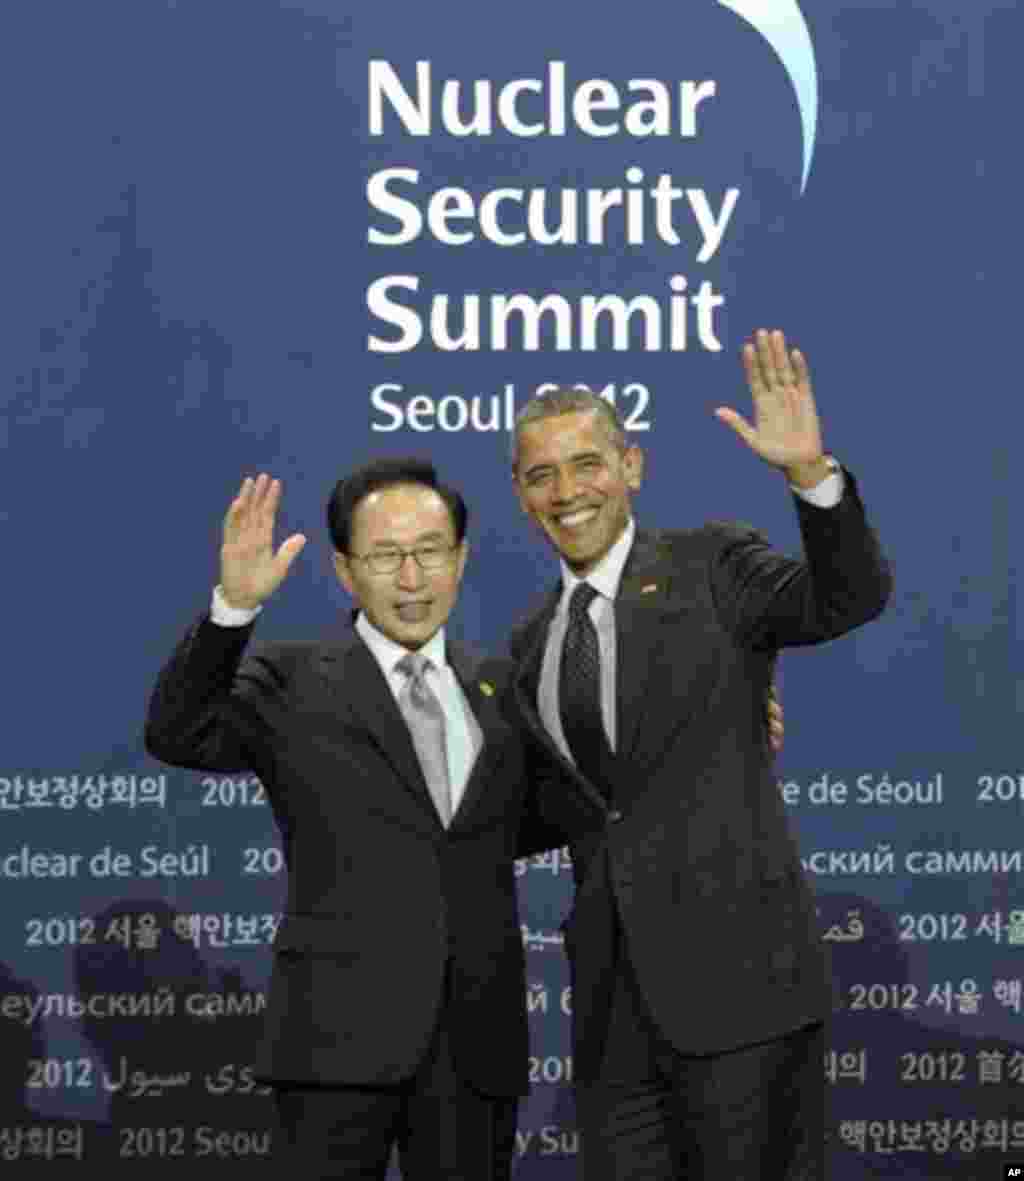 South Korean President Lee Myung-bak, left, and President Barack Obama wave during a welcome ceremony for the Nuclear Security Summit at the Coex Center, in Seoul, South Korea, Monday, March 26, 2012. (AP Photo/Susan Walsh)